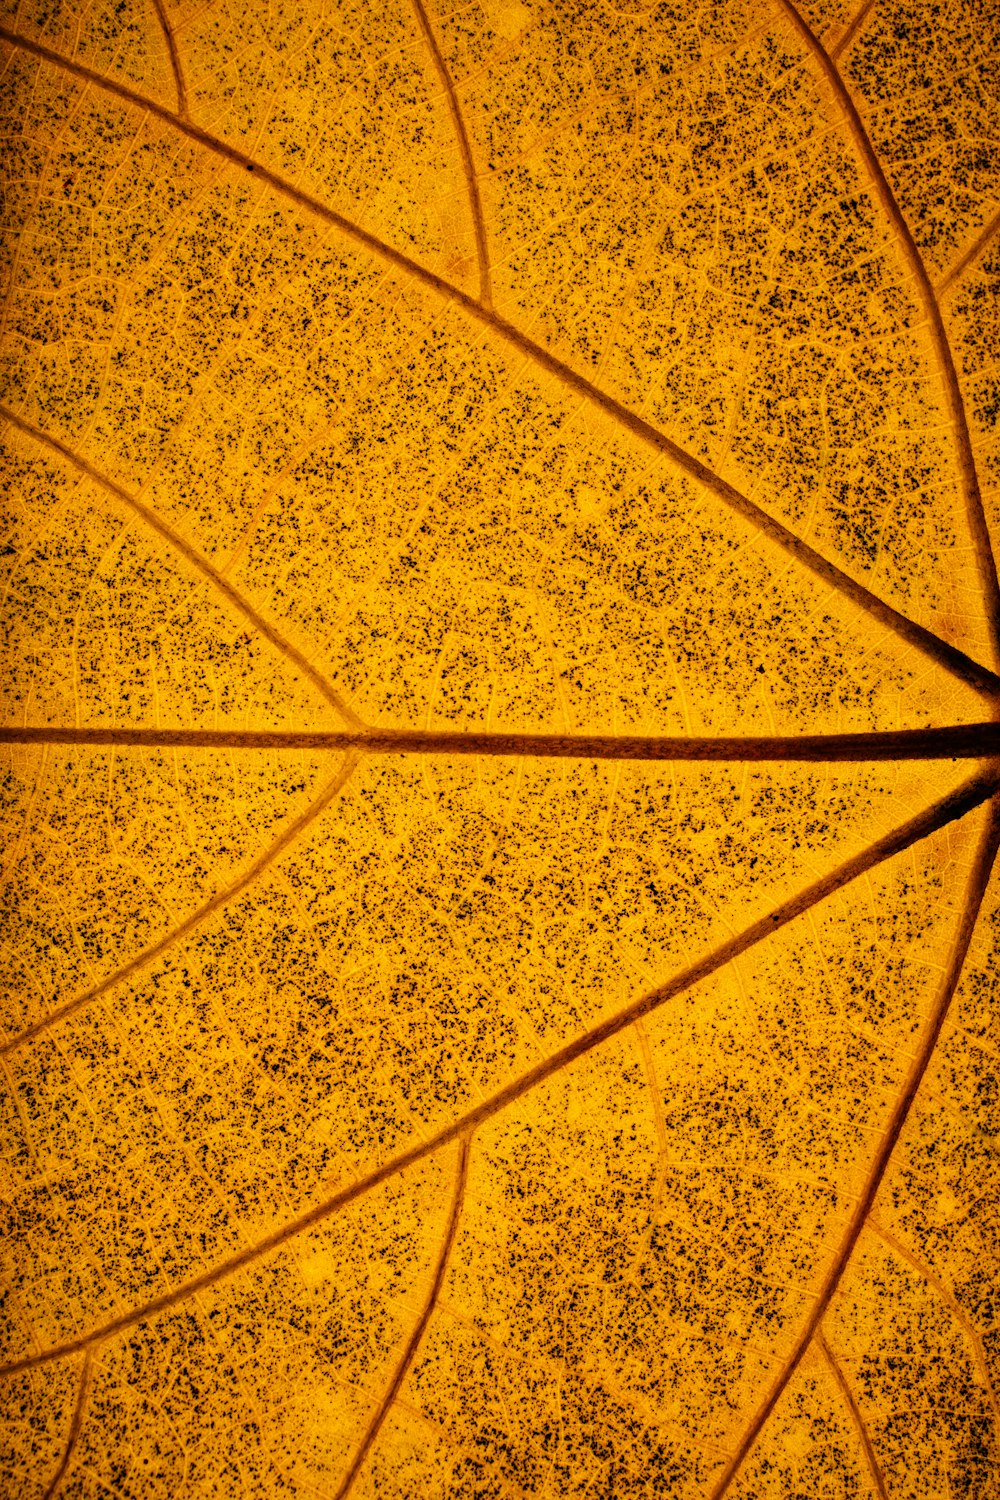 a close up view of a yellow leaf